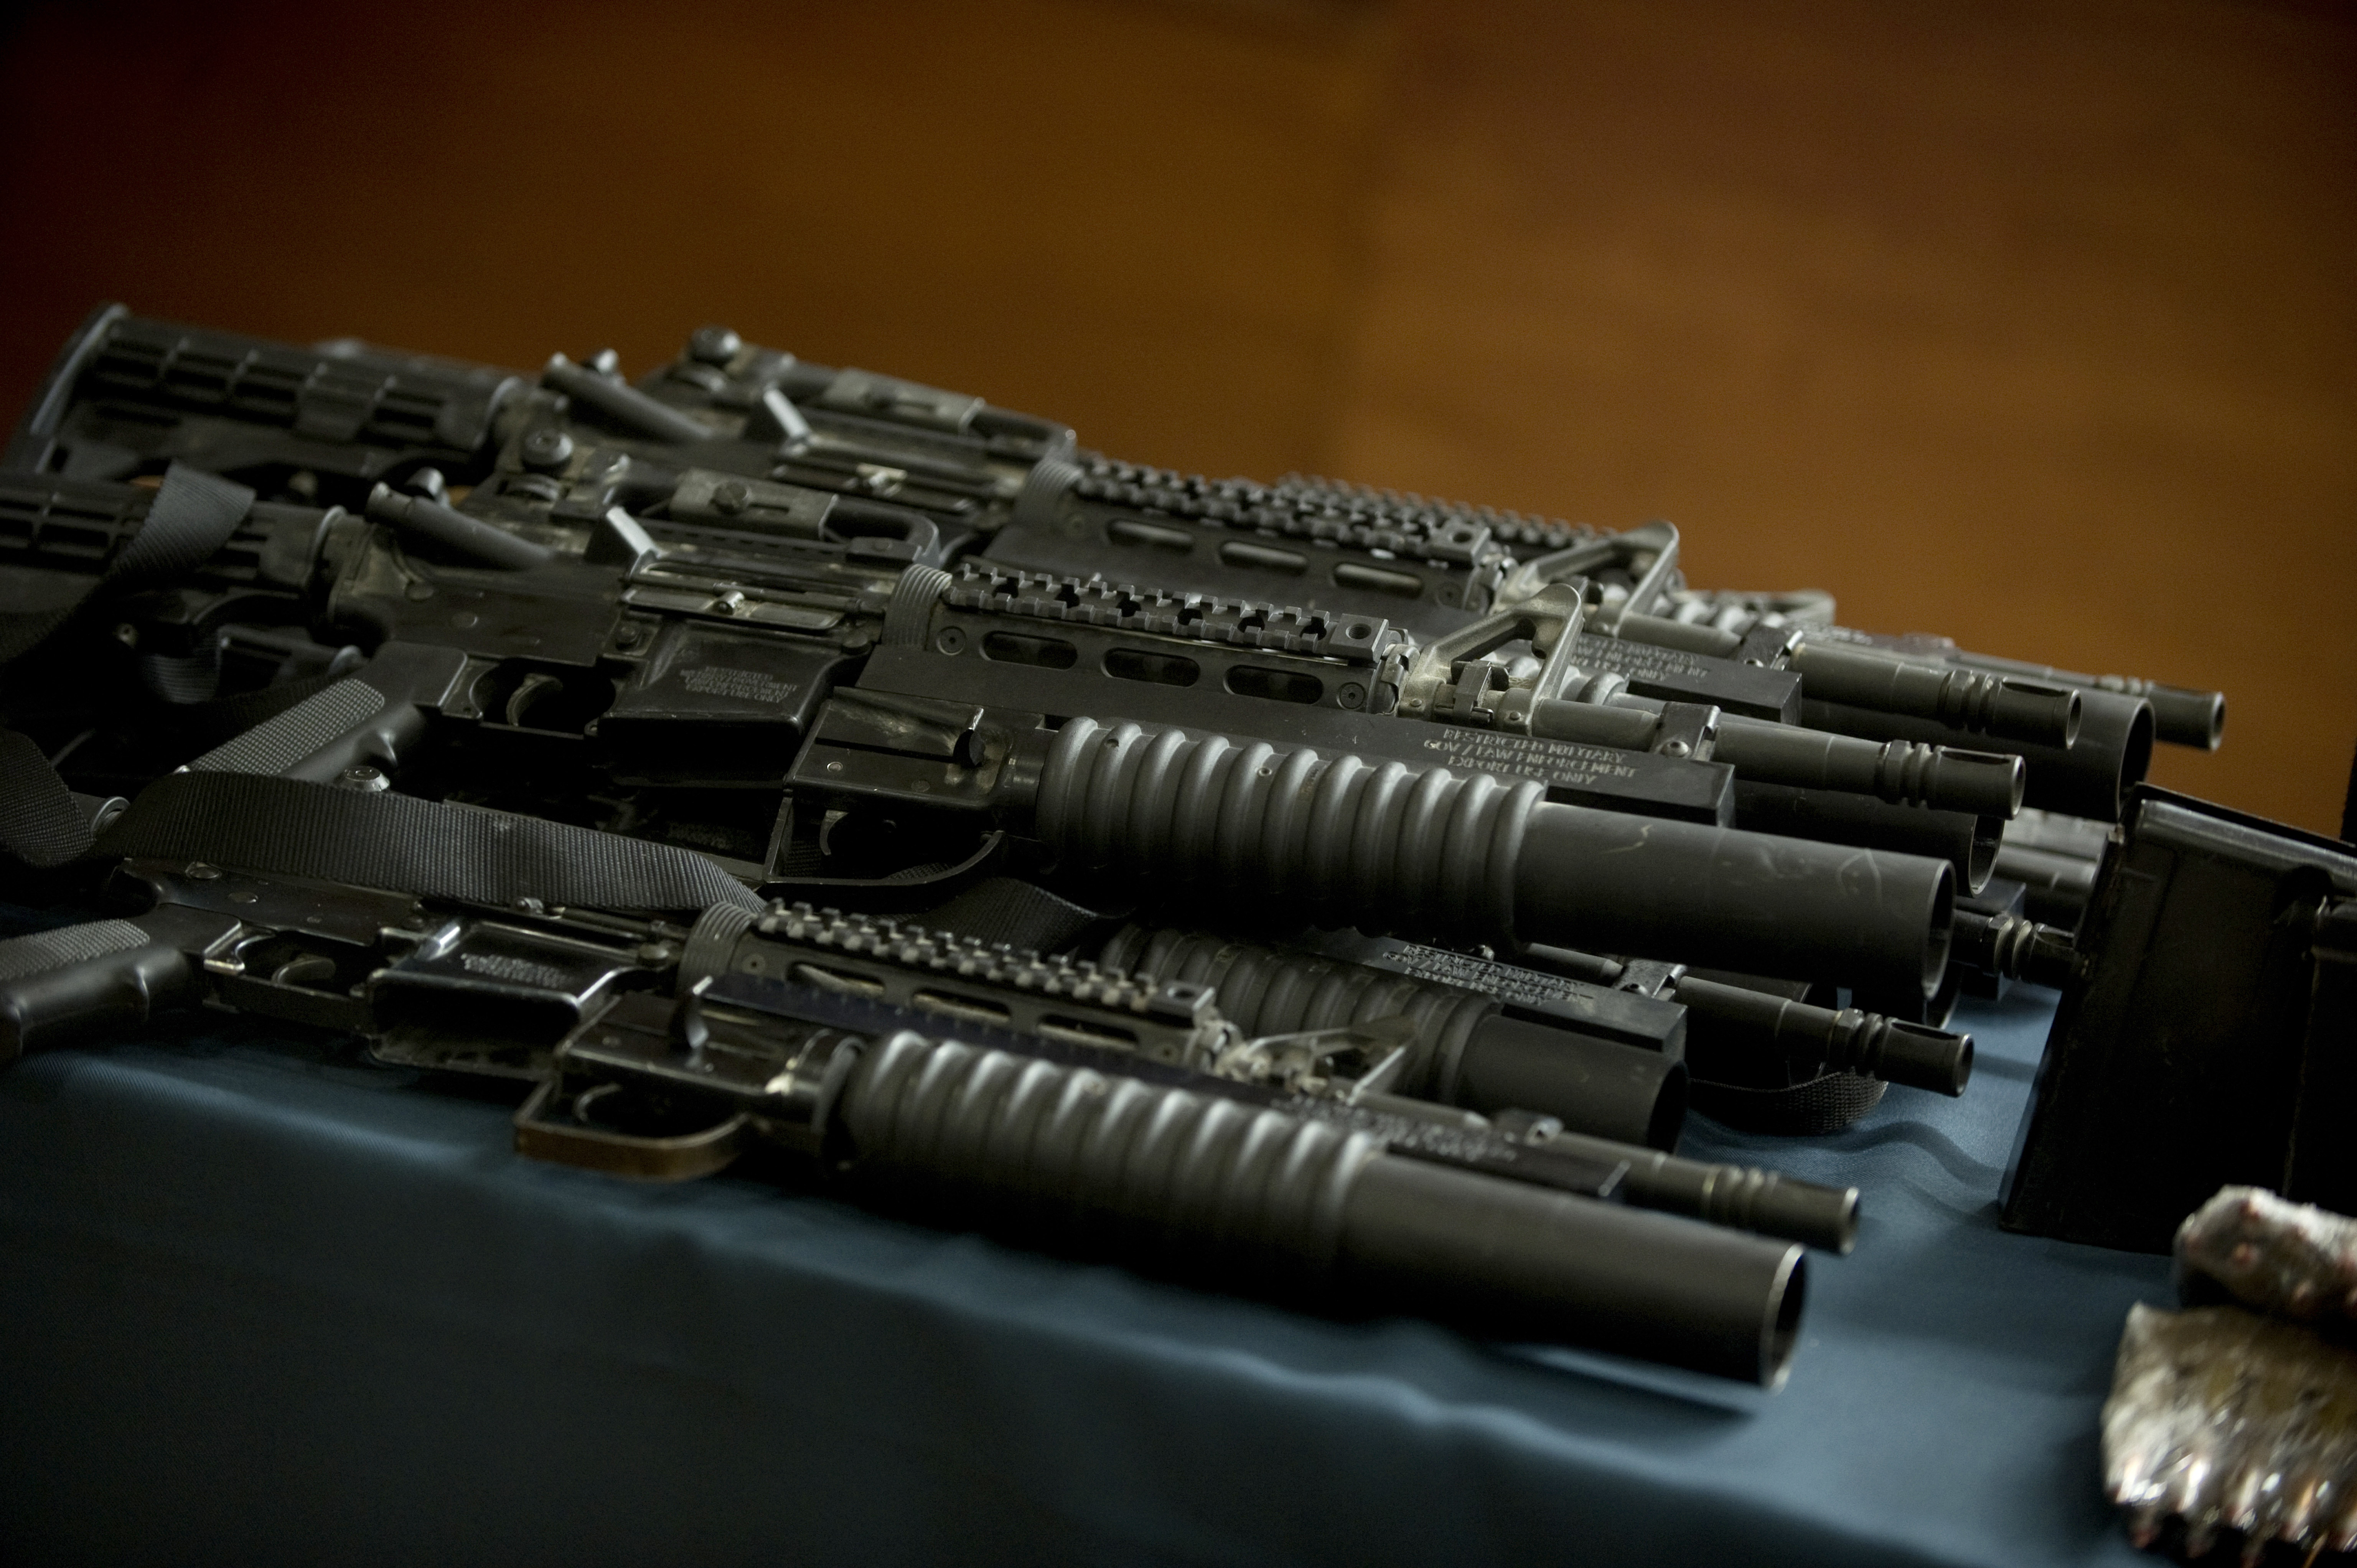 Some US made M4A1 rifles with grenade launchers, part of an arsenal seized to the leader of the drug cartel "Cartel de Jalisco Nueva Generacion", Erick Valencia Salazar, are presented to the press on March 12, 2012 in Mexico City. Salazar, aka "El 85", was arrested during a military operation in Guadalajara on March 9, 2012 with an arsenal of war weapons. Mexican officials have urged the United States for years to enact the type of gun control proposed by President Barack Obama, arguing that drug gangs were using US-made assault rifles in brutal turf wars. Analysts, however, say the measures unveiled on January 16, 2013 would do little to stem Mexico's wave of gangland killings for now, since drug cartels have built an arsenal of military-style guns to outgun local police. AFP PHOTO/  Yuri CORTEZ        (Photo credit should read YURI CORTEZ/AFP/Getty Images)